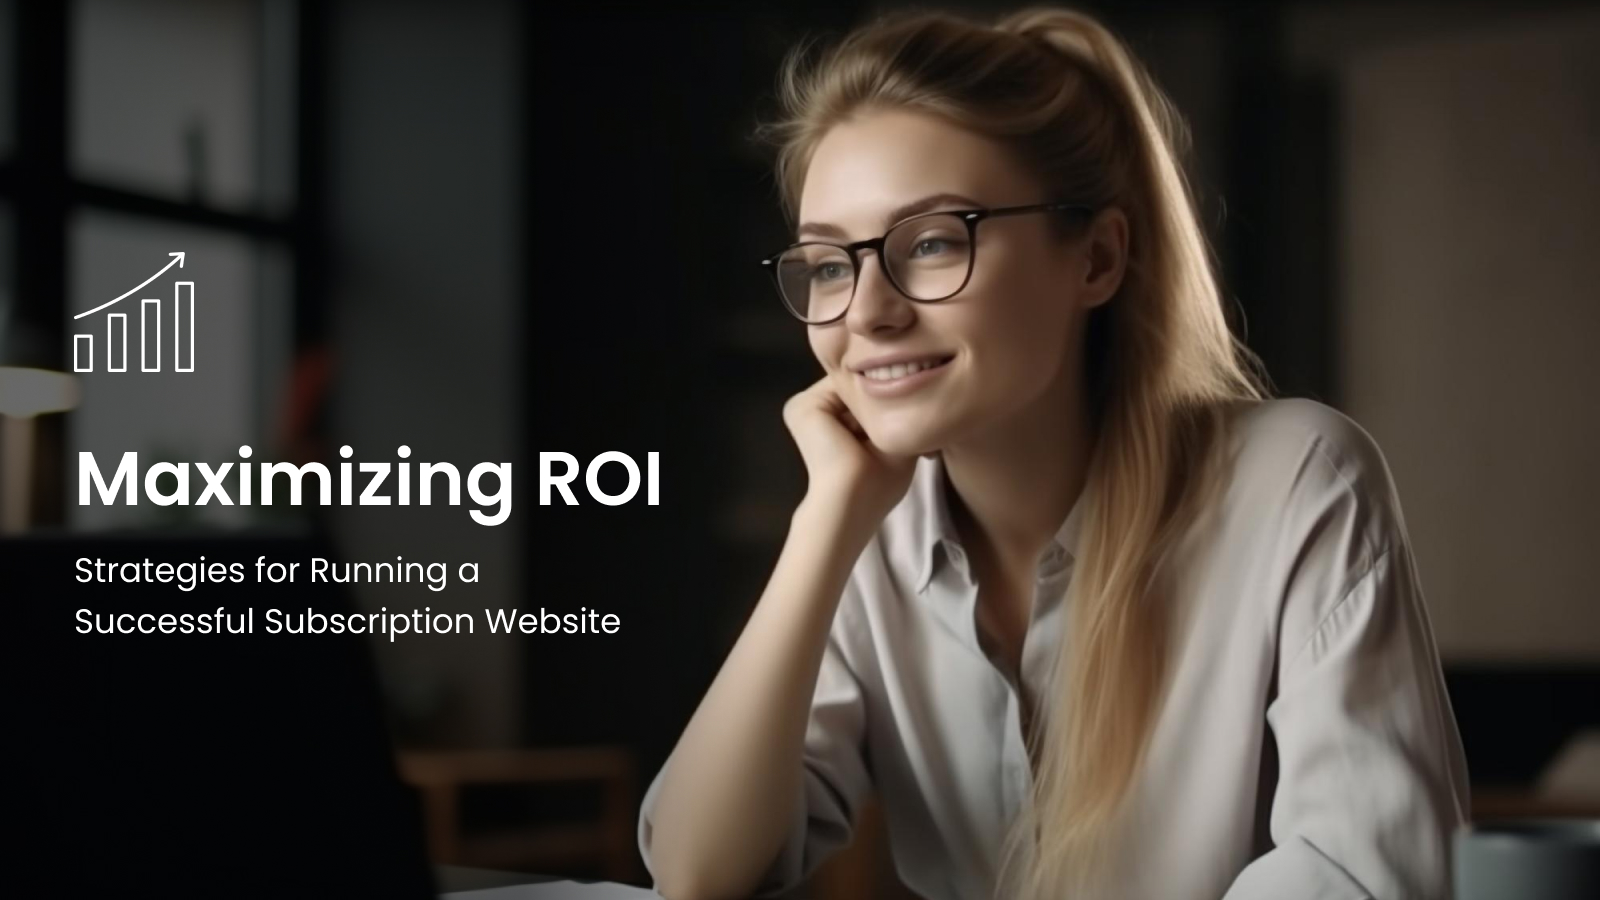 Maximizing ROI: Strategies for Running a Successful Subscription Website